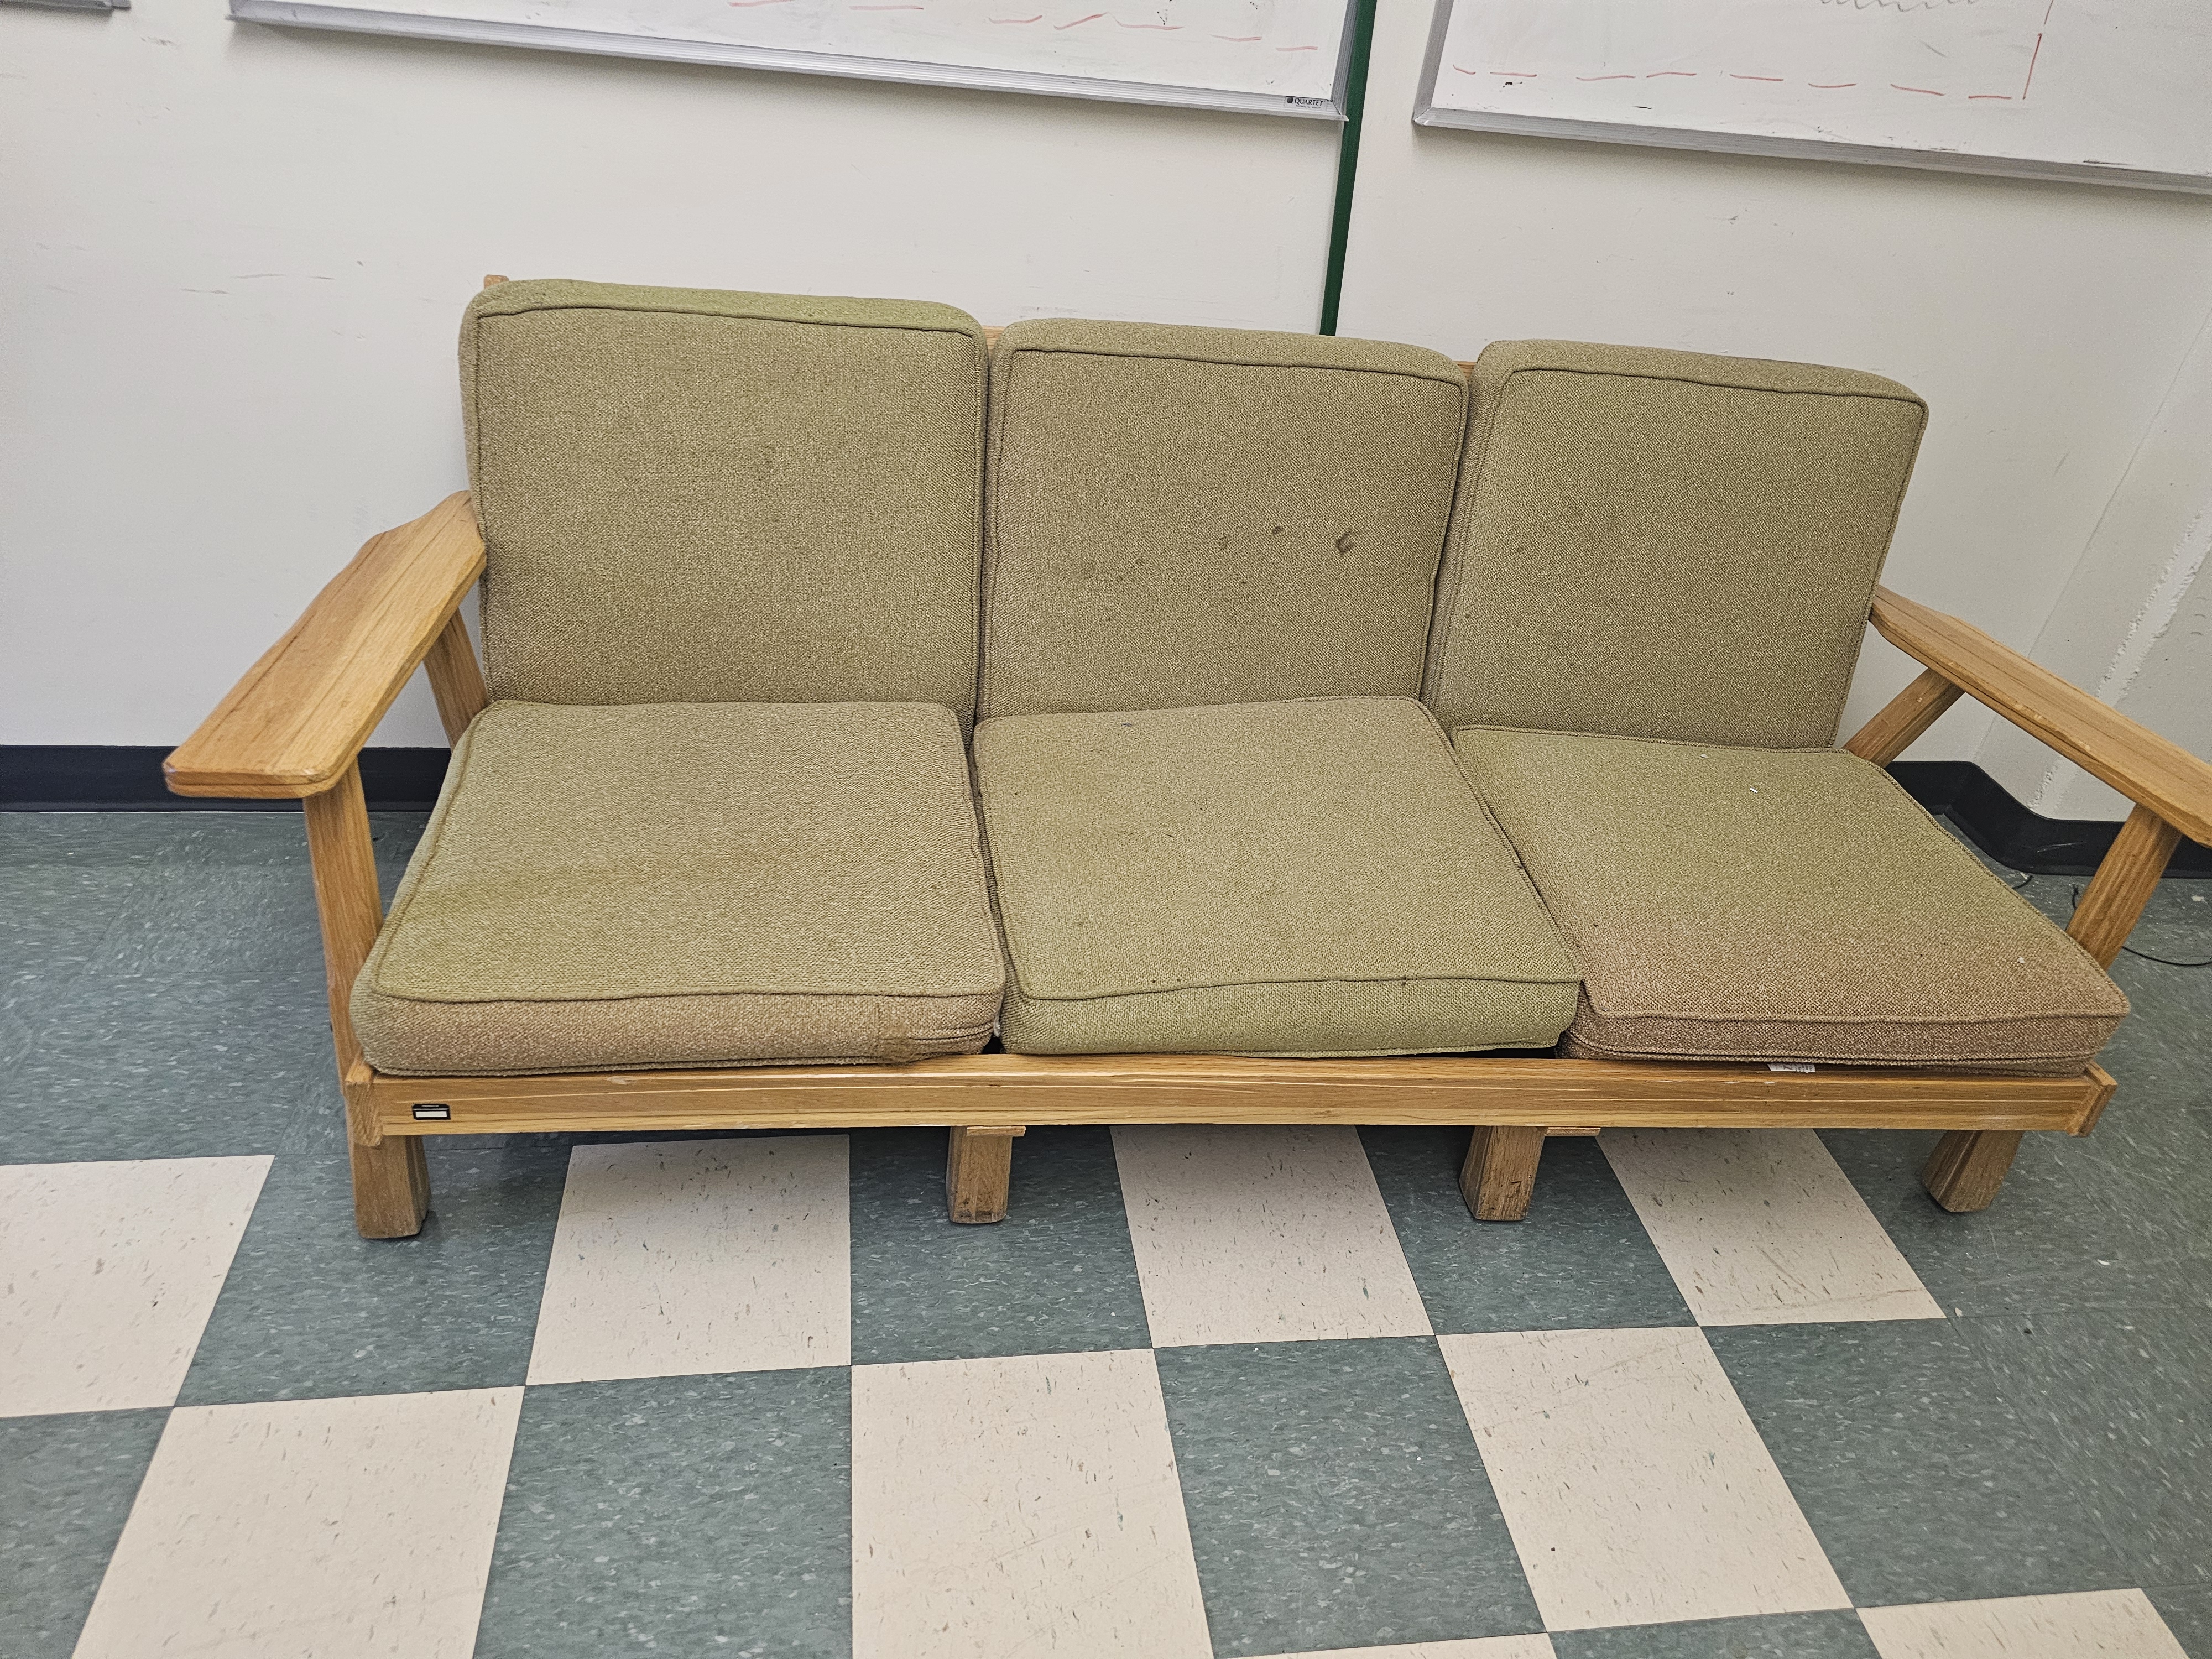 Wood frame three seater chair